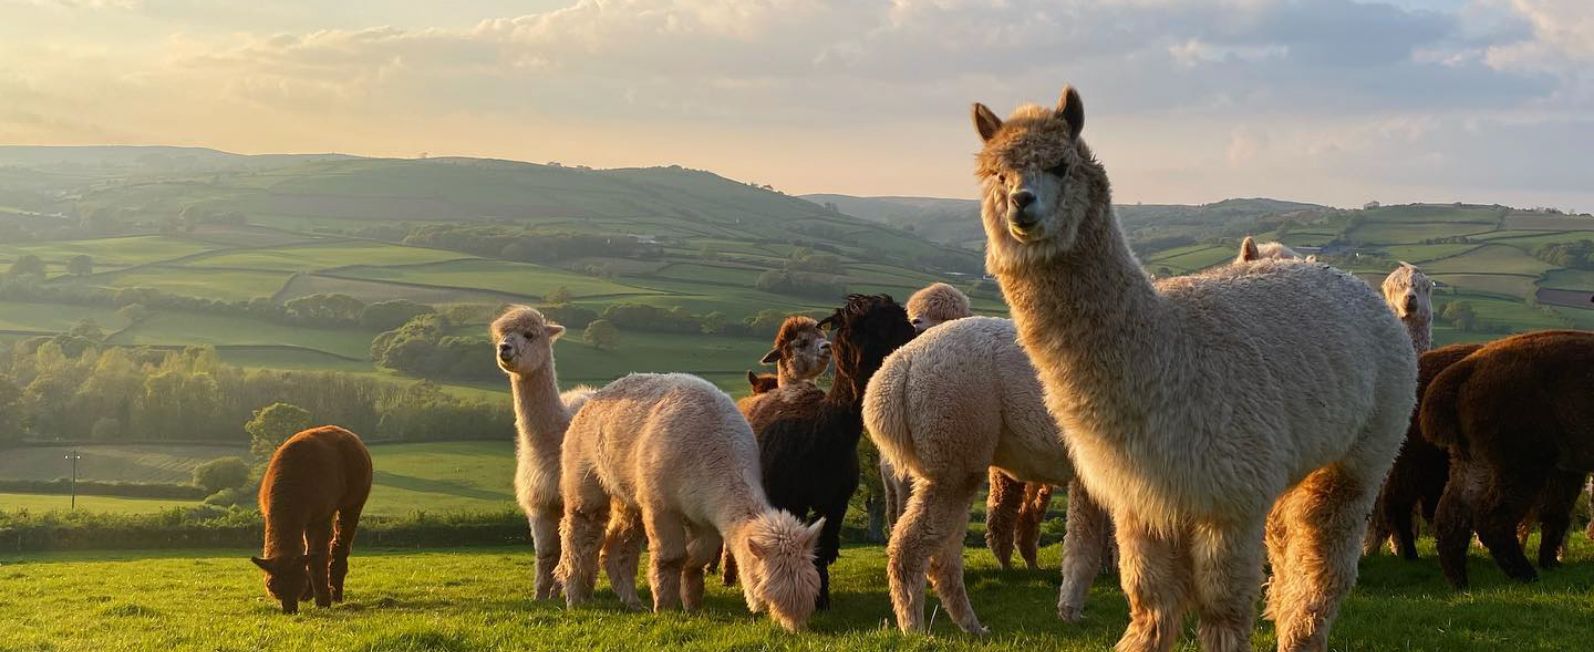 alpaca experience, family day out wales, animal encounters, things to do in brecon beacons